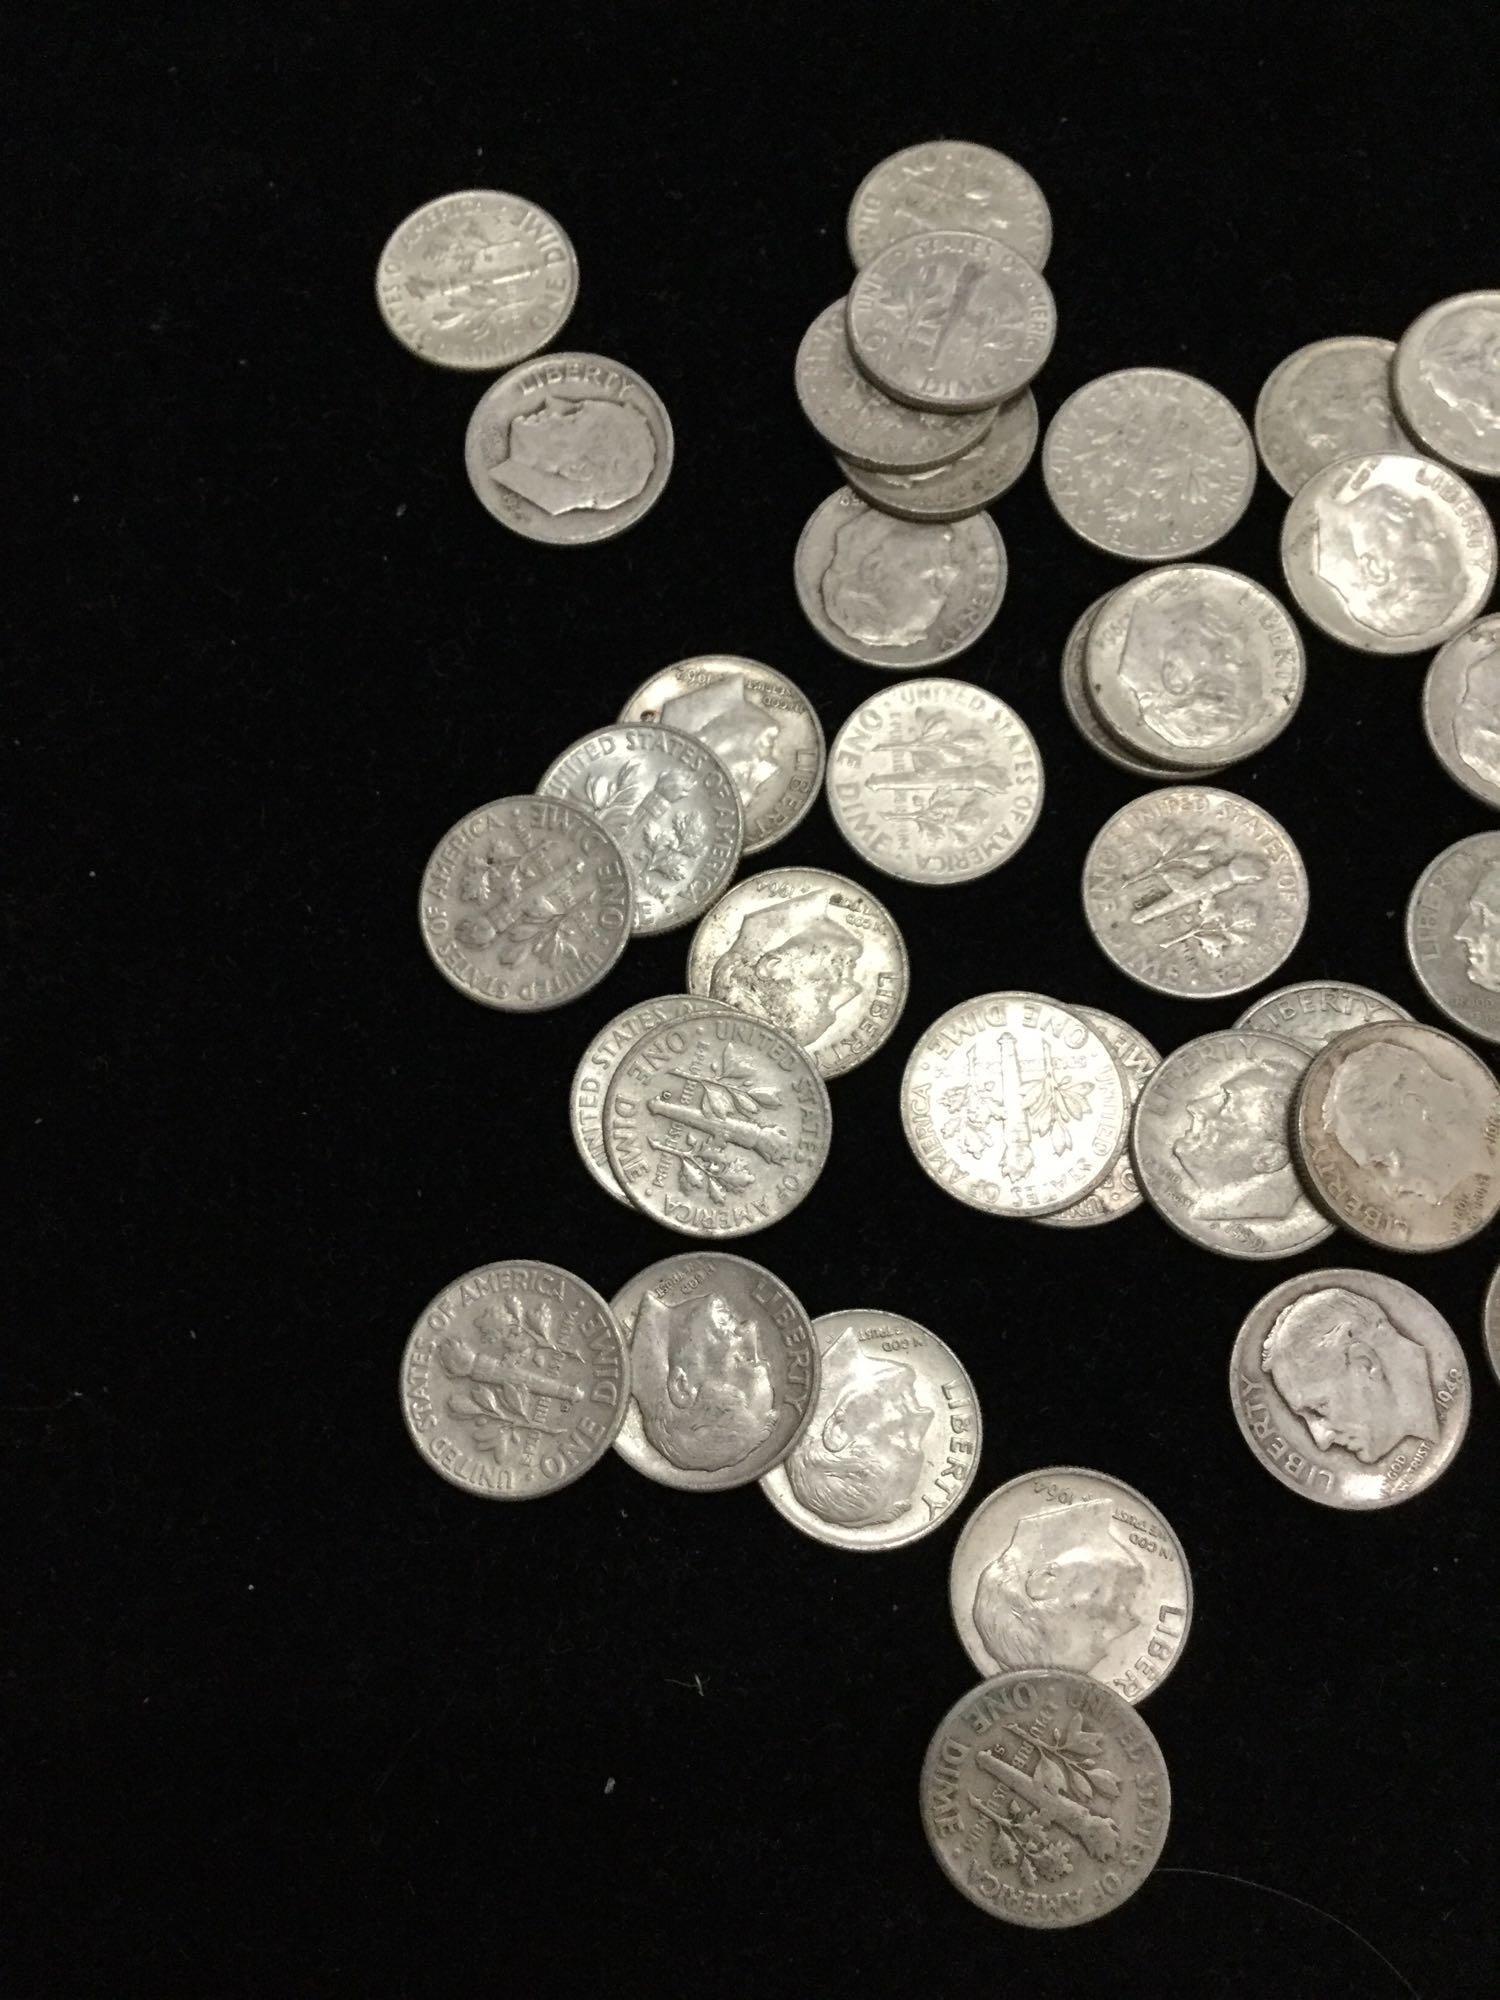 Collection of 100 un-researched silver Roosevelt dimes, all pre 1964 from estate safe deposit box.